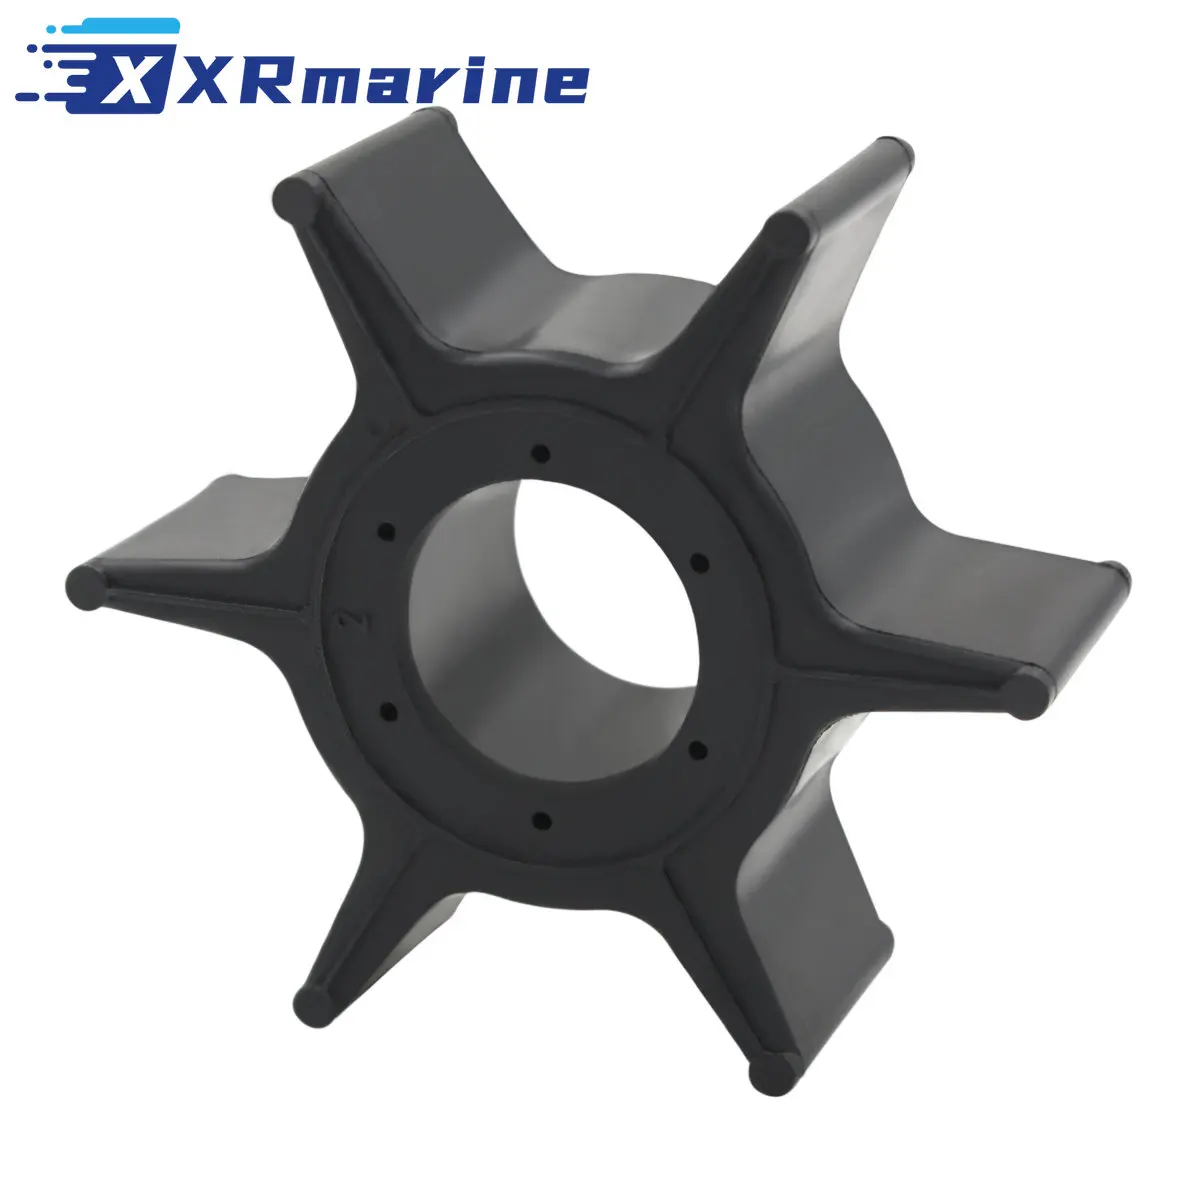 Water Pump Impeller 19210-ZV7-003 for Honda Marine Outboard BF25A BF25D BF30A BF30D 25HP 30HP Motors Replaces 18-3249 19210 zw1 003 303 water pump impeller for honda 75hp bf75at bf75aw 90hp bf90at bf90aw 4 stroke outboard 18 3056 89630 500301